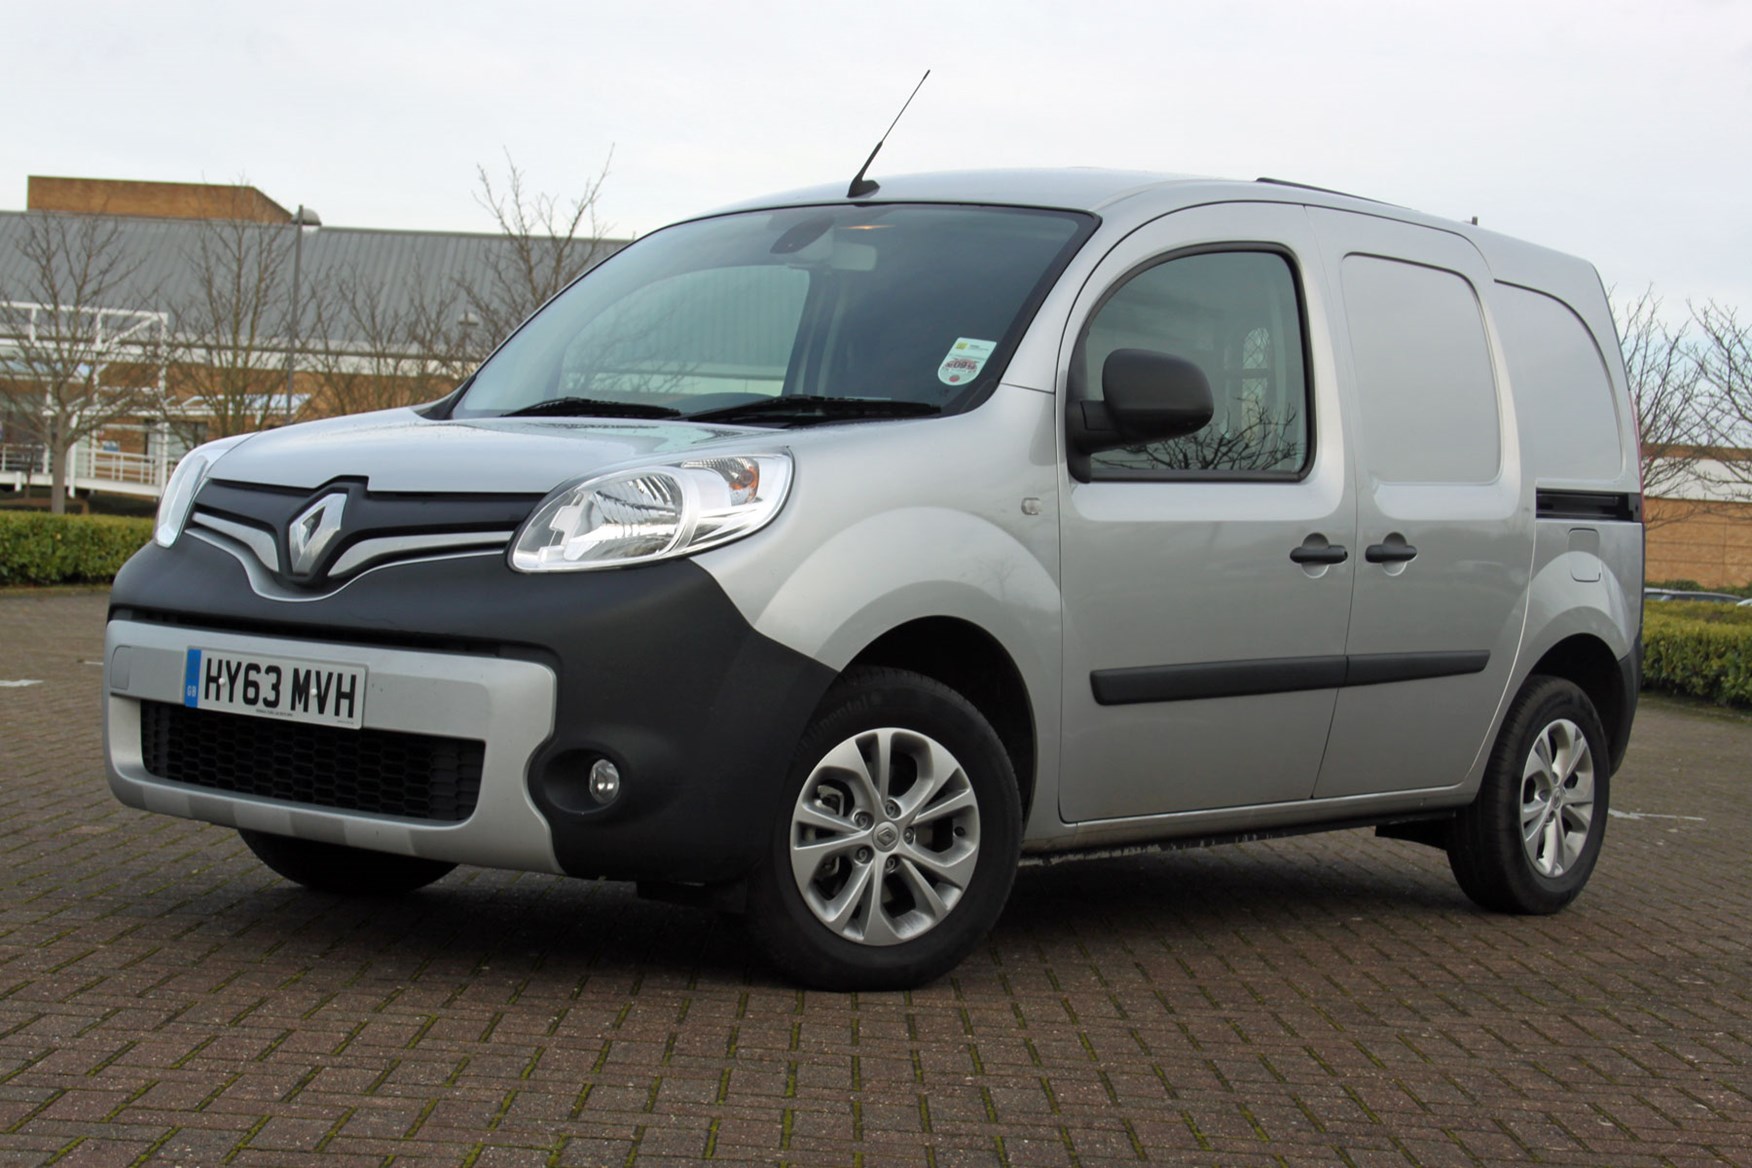 Renault Kangoo Sport review - front view, silver